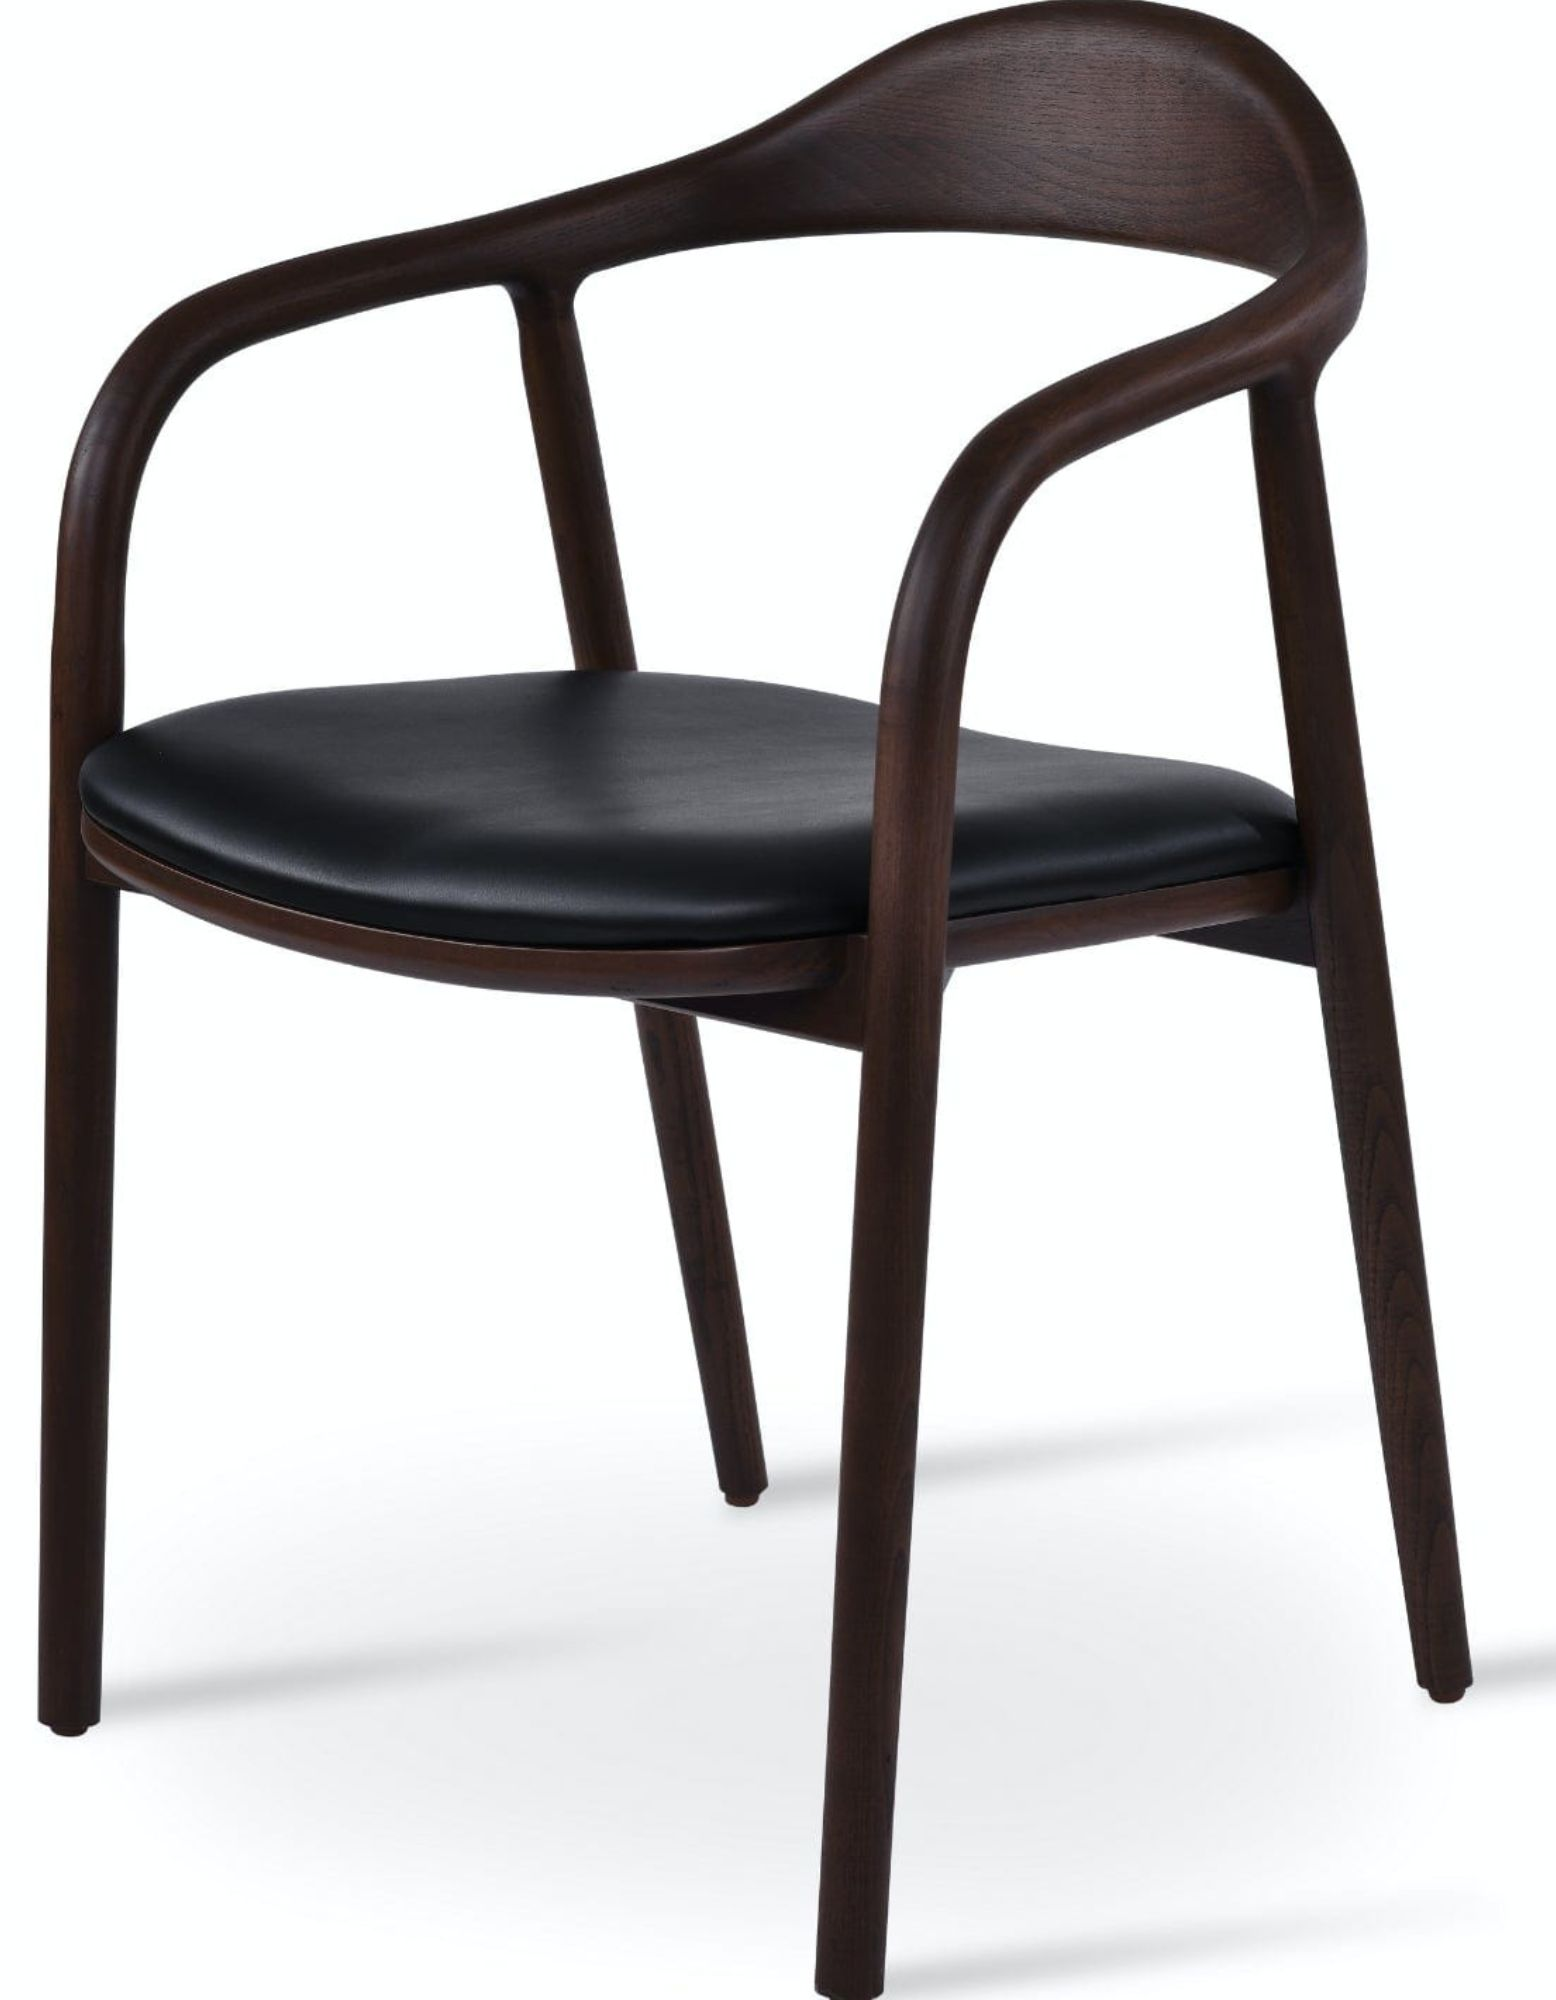 Your Bar Stools Canada infinity dining armchair